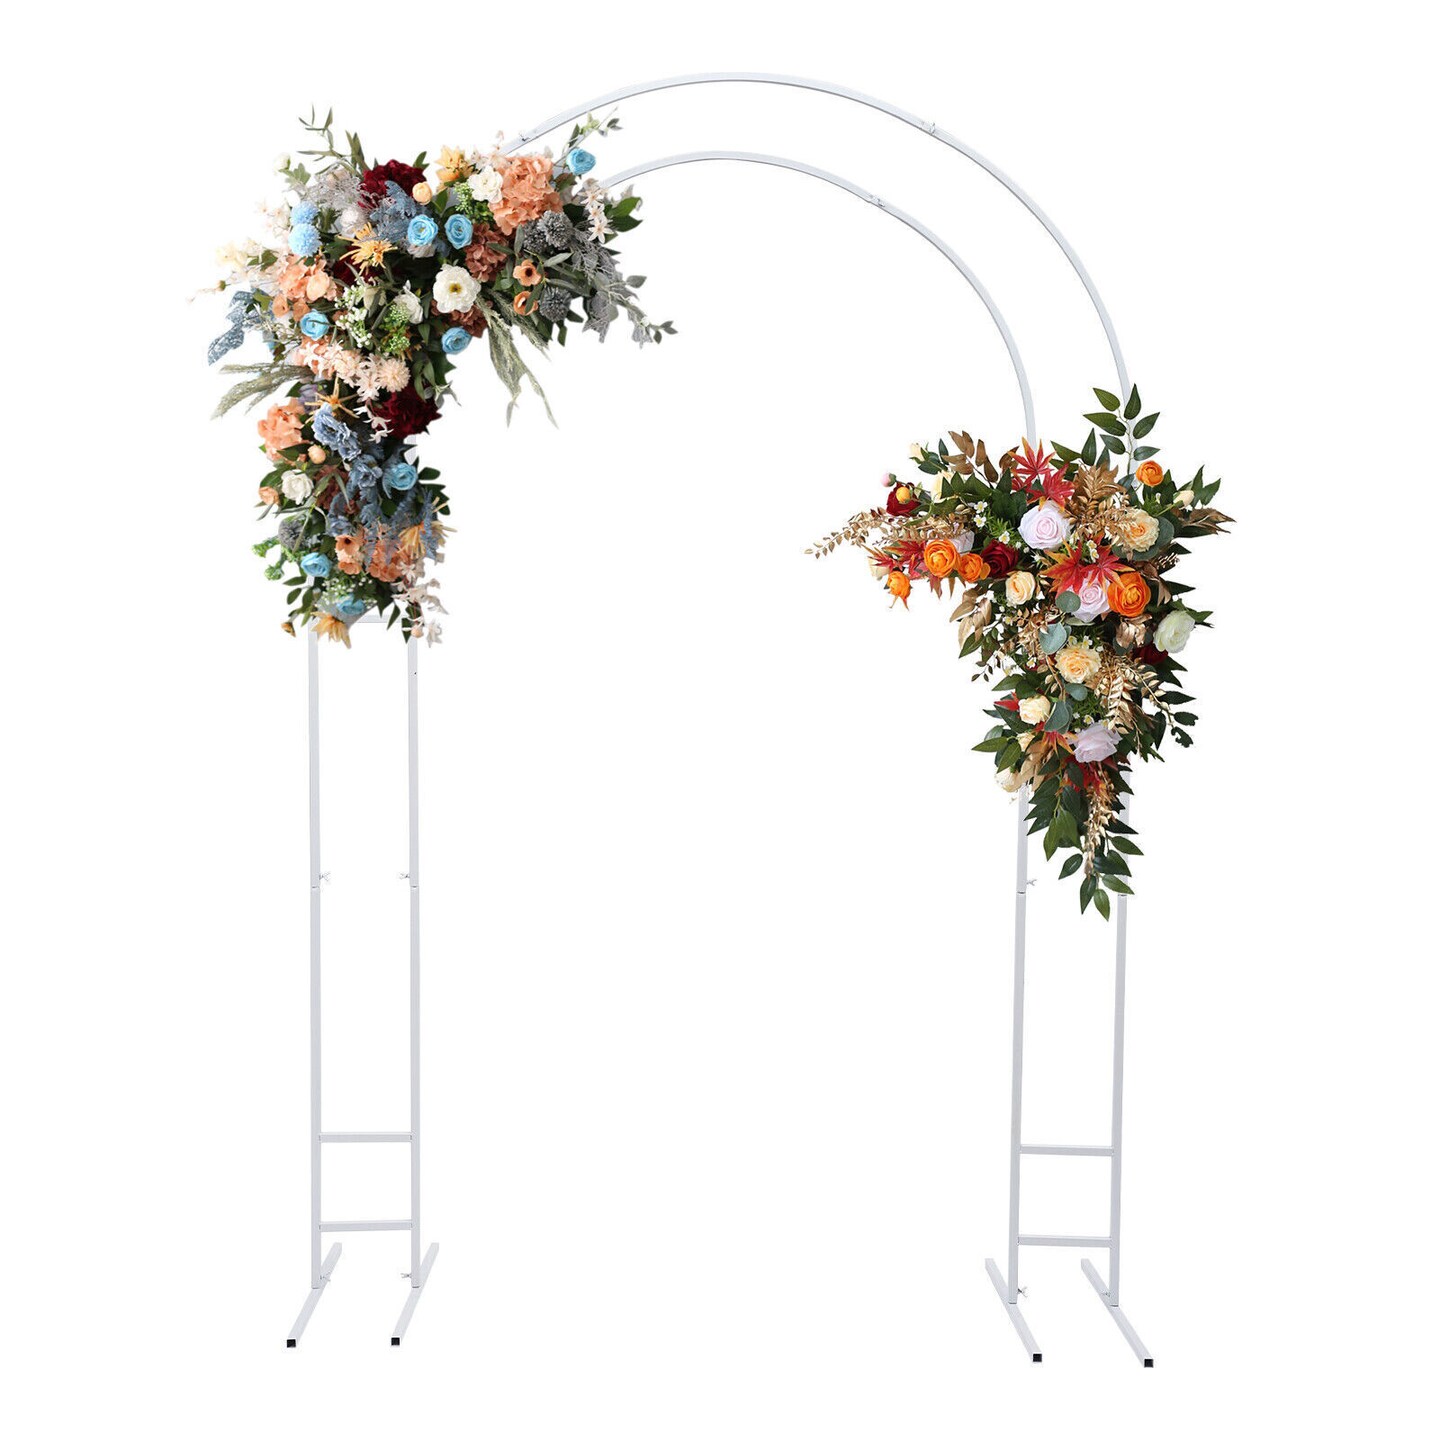 Kitcheniva 7.2ft Arch Wedding Stand Party Backdrop